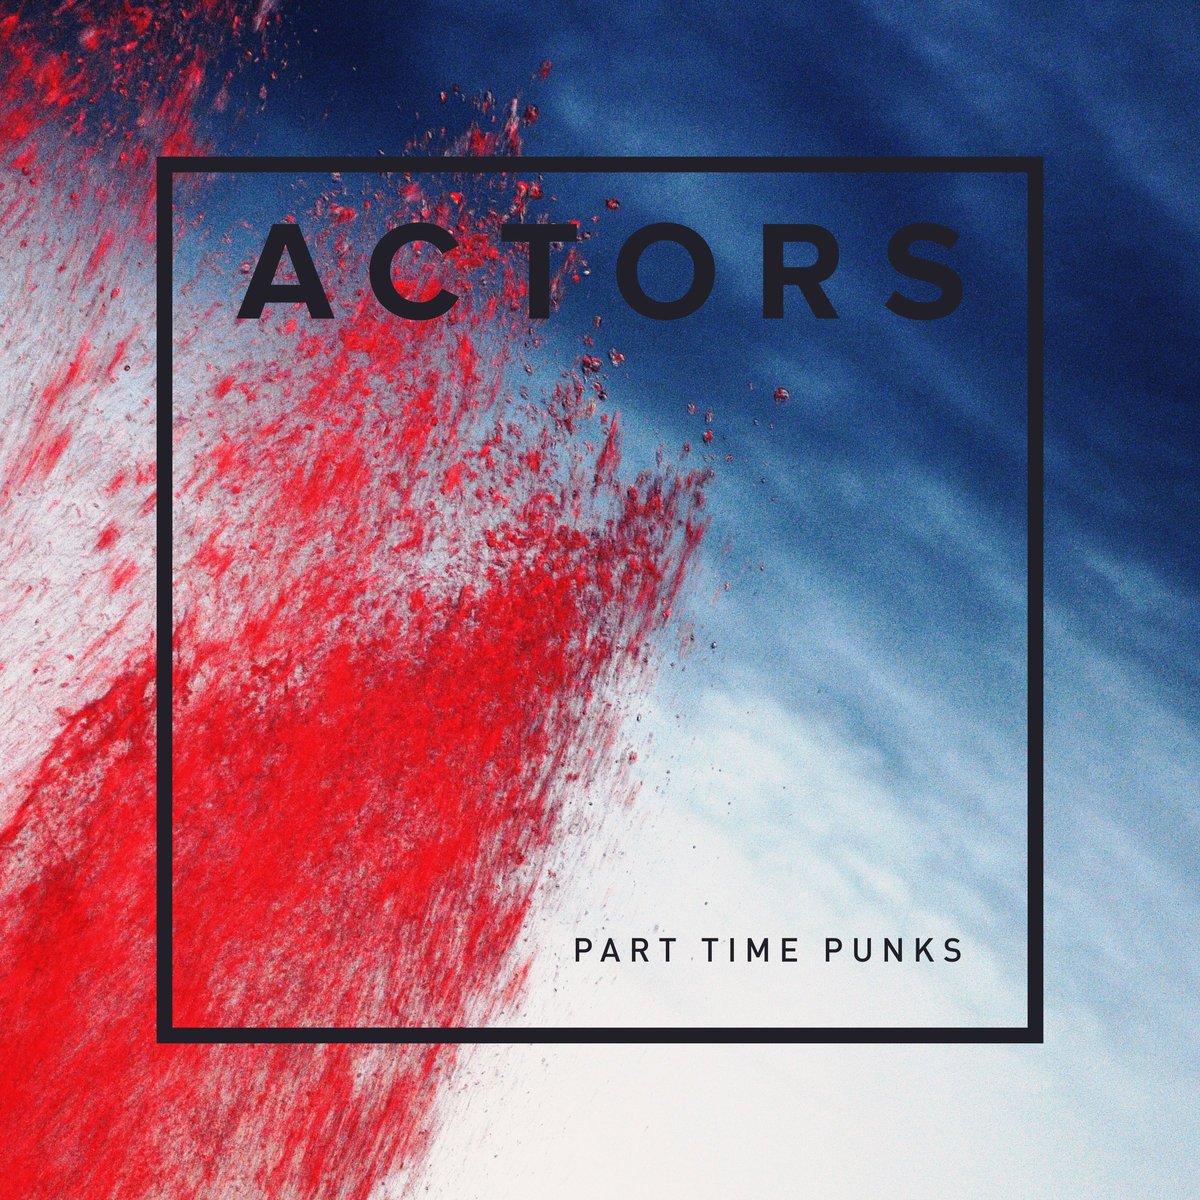 When #musicunites: Our buddy Josiah @CaveStudioLA just recorded & mixed our buddies & @artoffact label mates @ACTORStheband’s @parttimepunks sessions! Nice to hear this band with LOUD guitars! actors.bandcamp.com/album/part-tim…